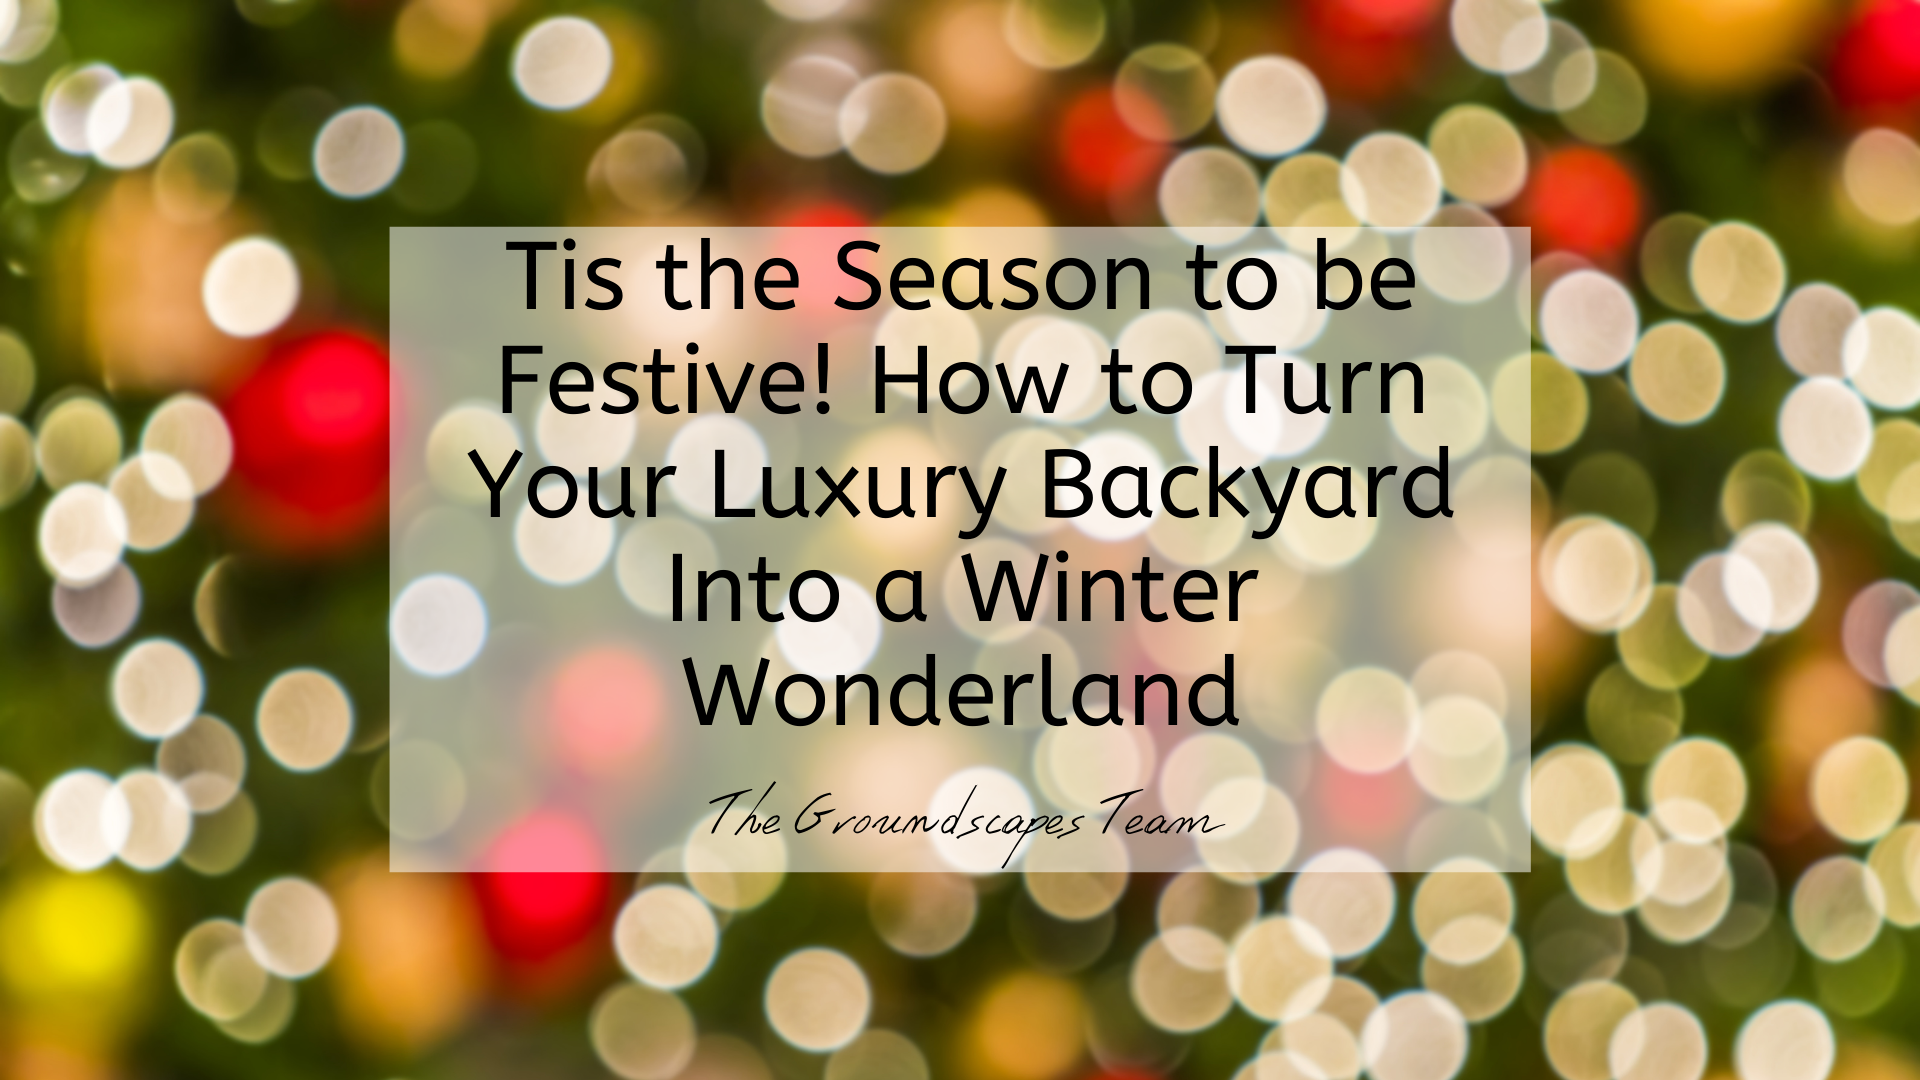 Tis the Season to be Festive! How to Turn Your Luxury Backyard Into a Winter Wonderland